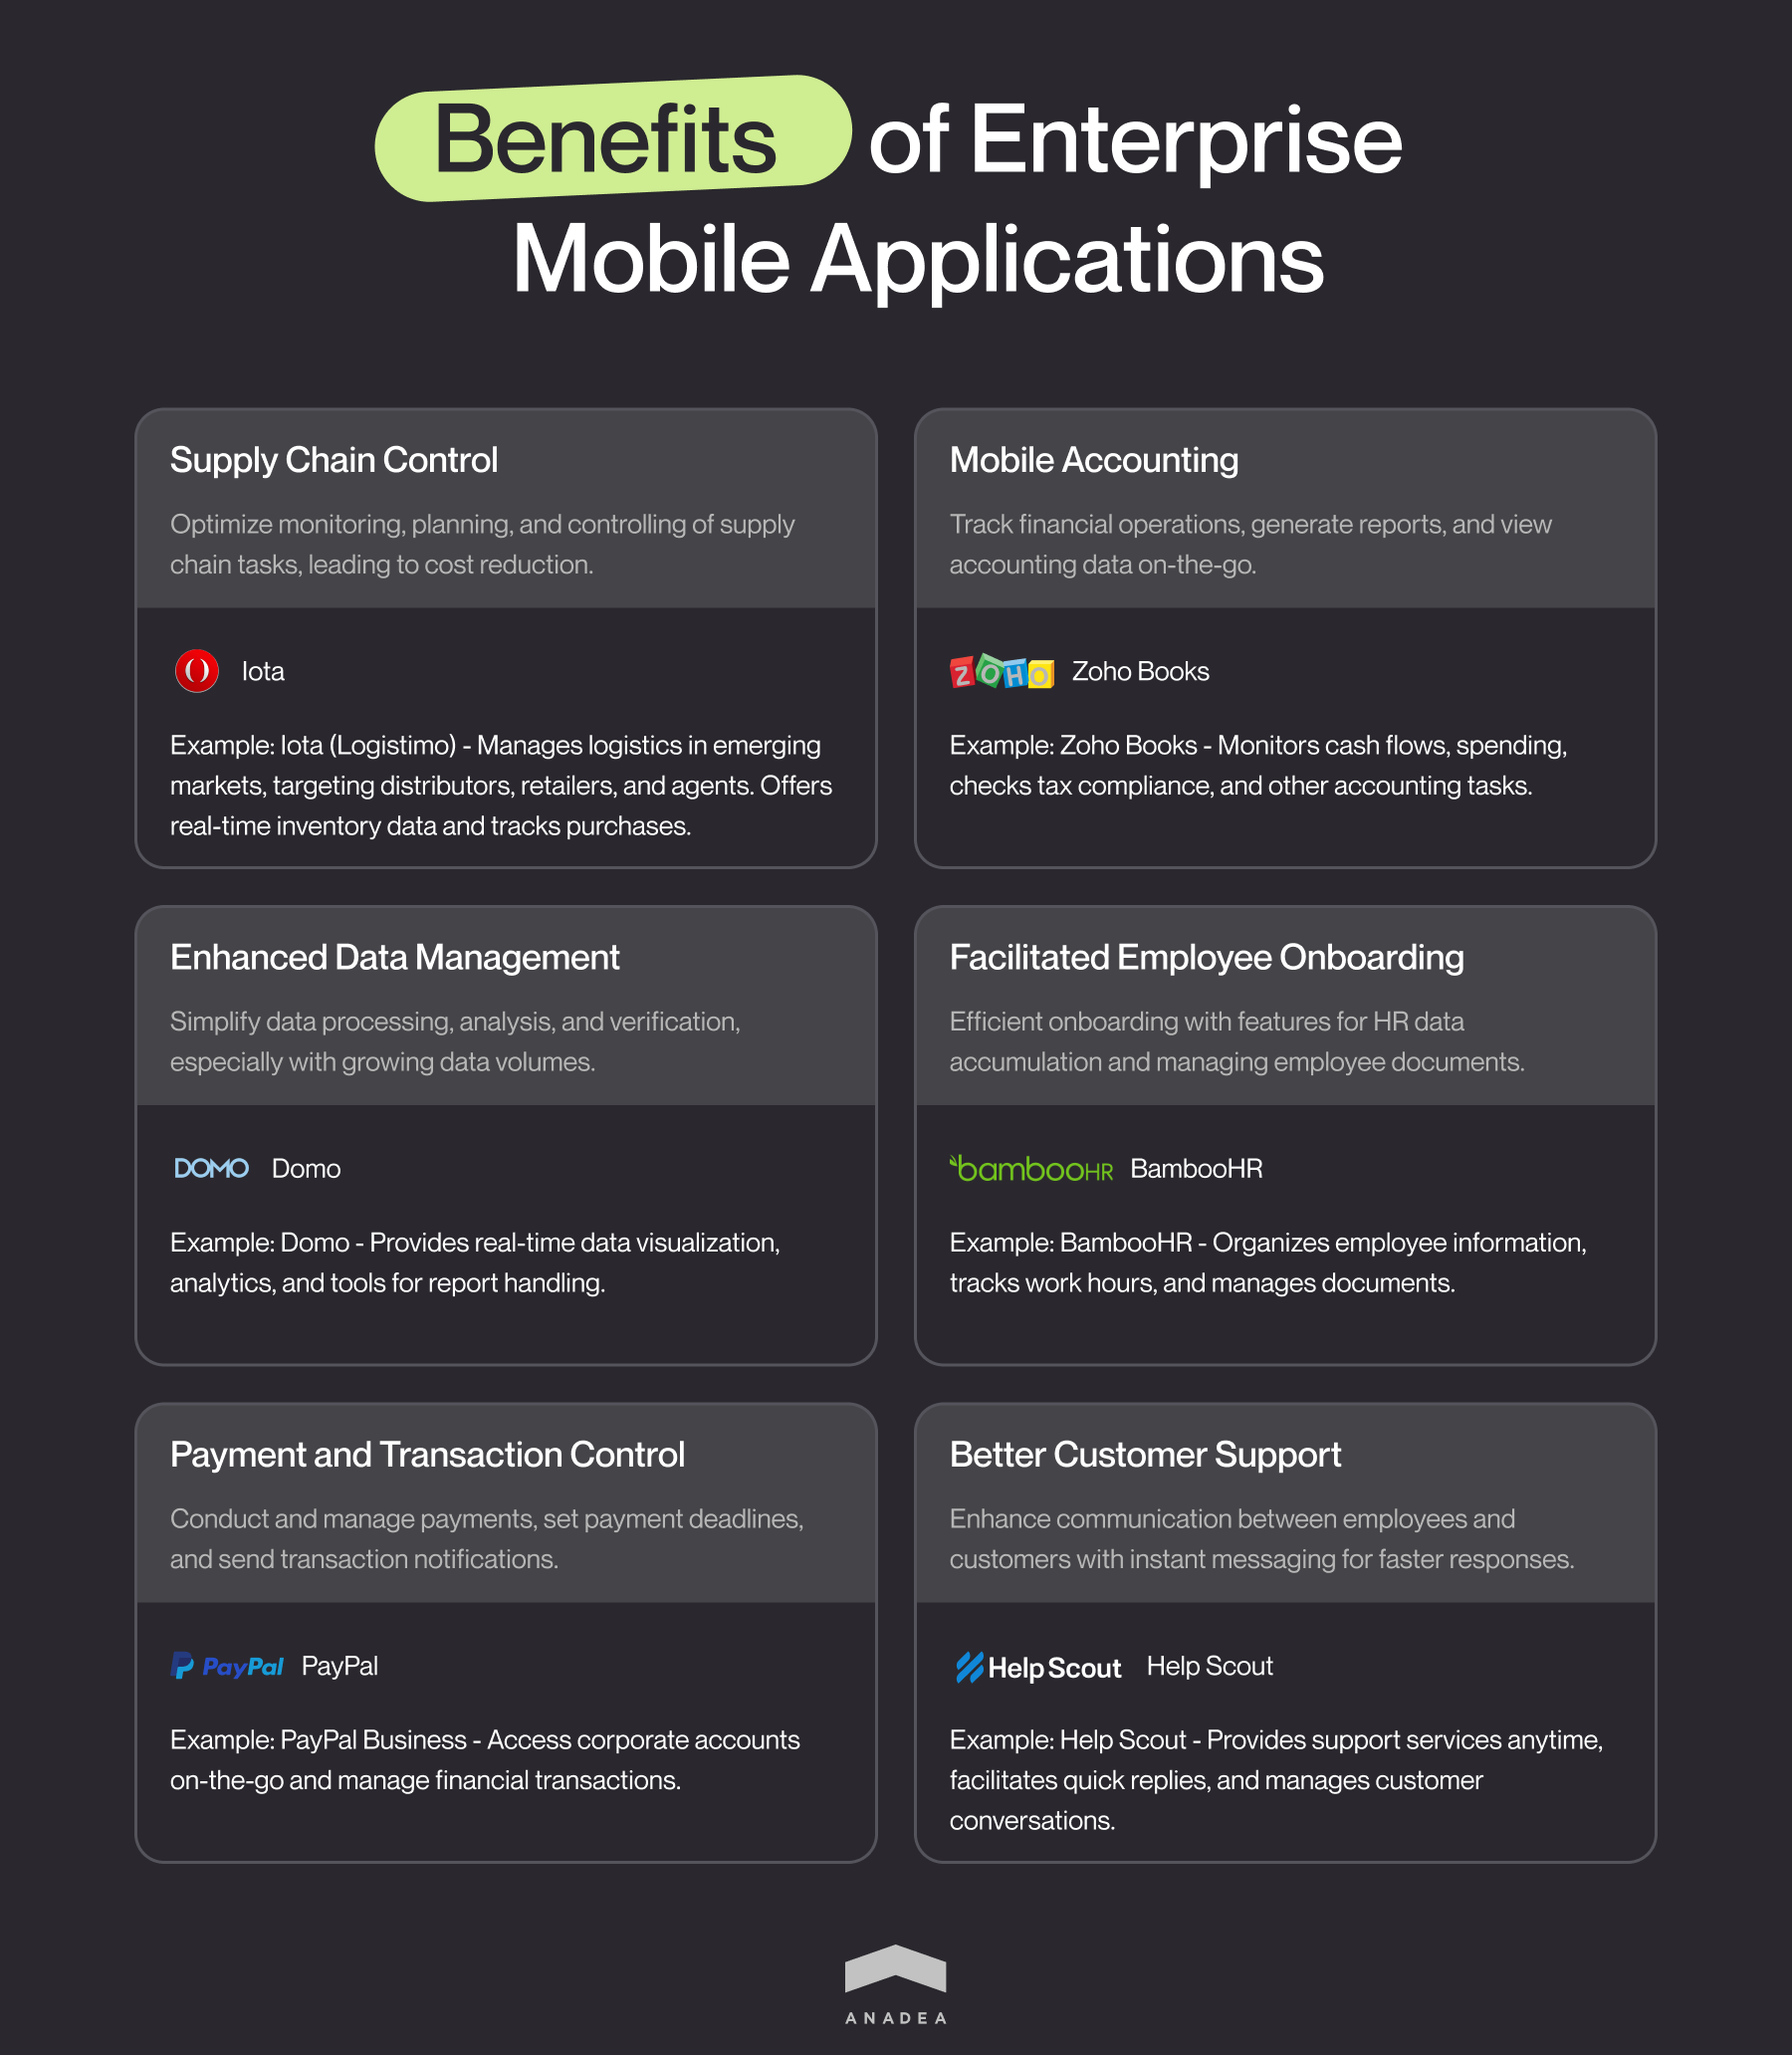 Benefits of enterprise mobile apps with examples